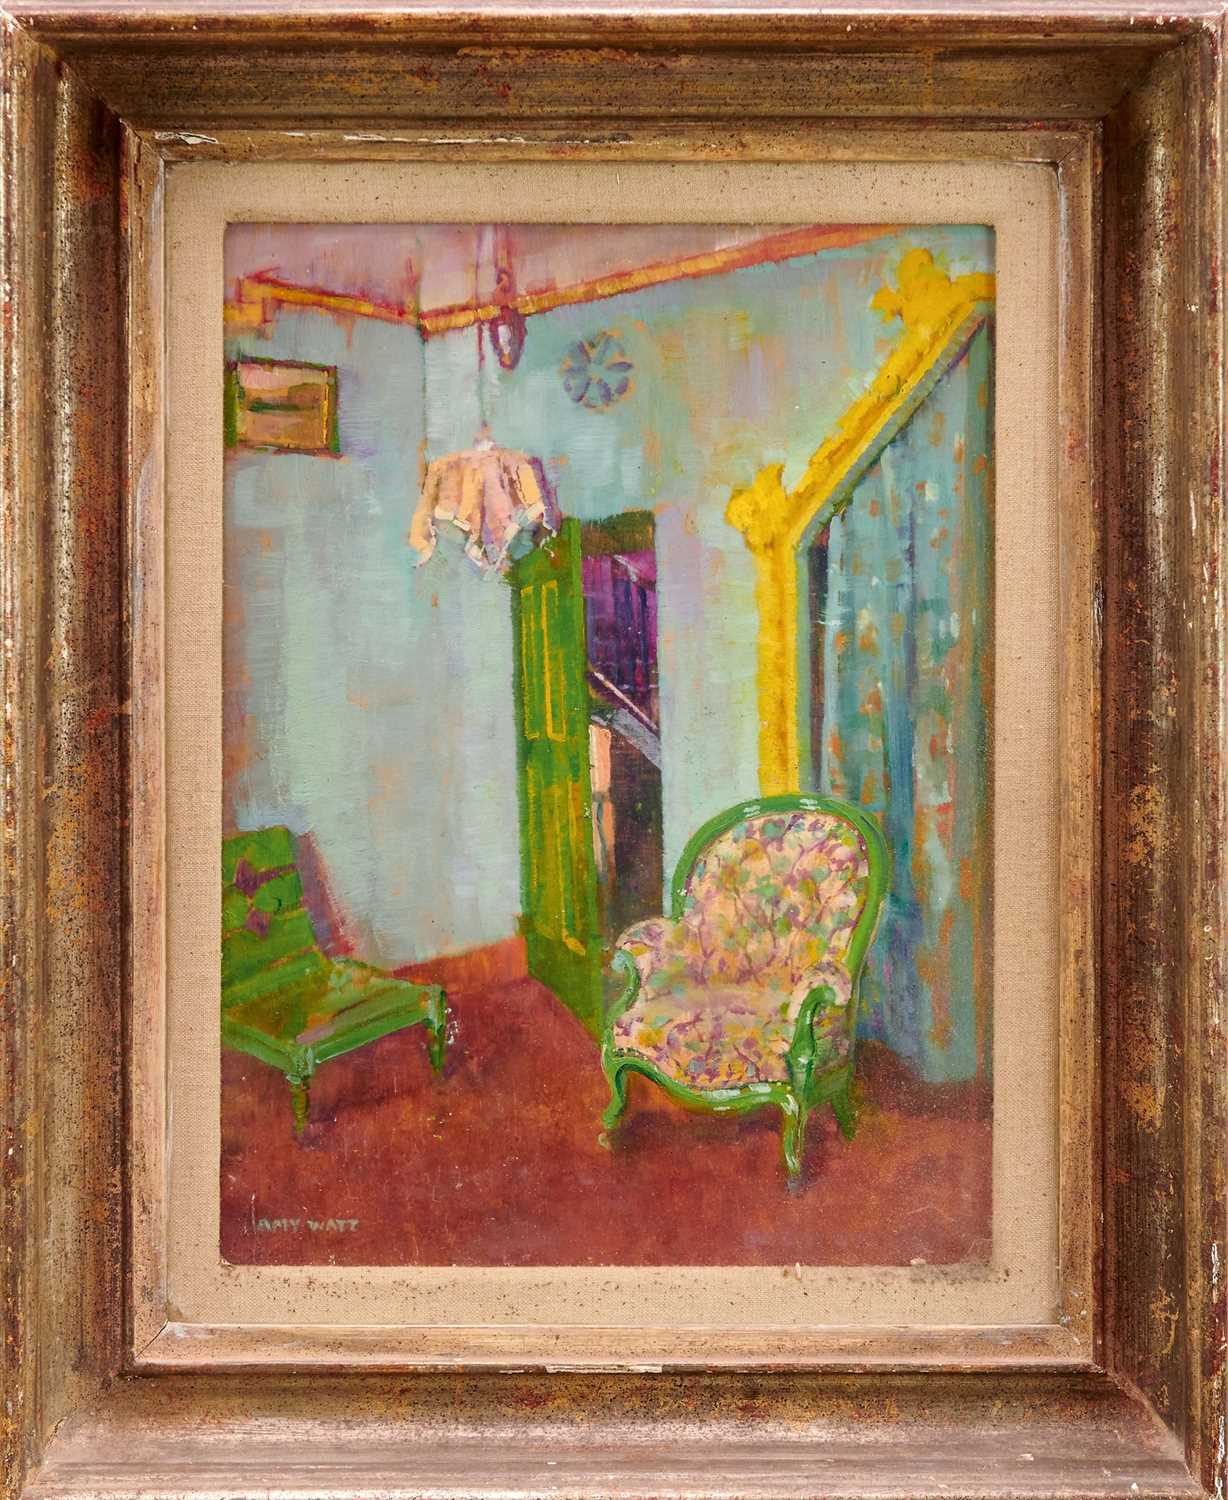 Lot 880 - Amy Watt (1900-1956) oil on panel, Interior at Martigues, France, signed 40 x 31cm, in glazed frame